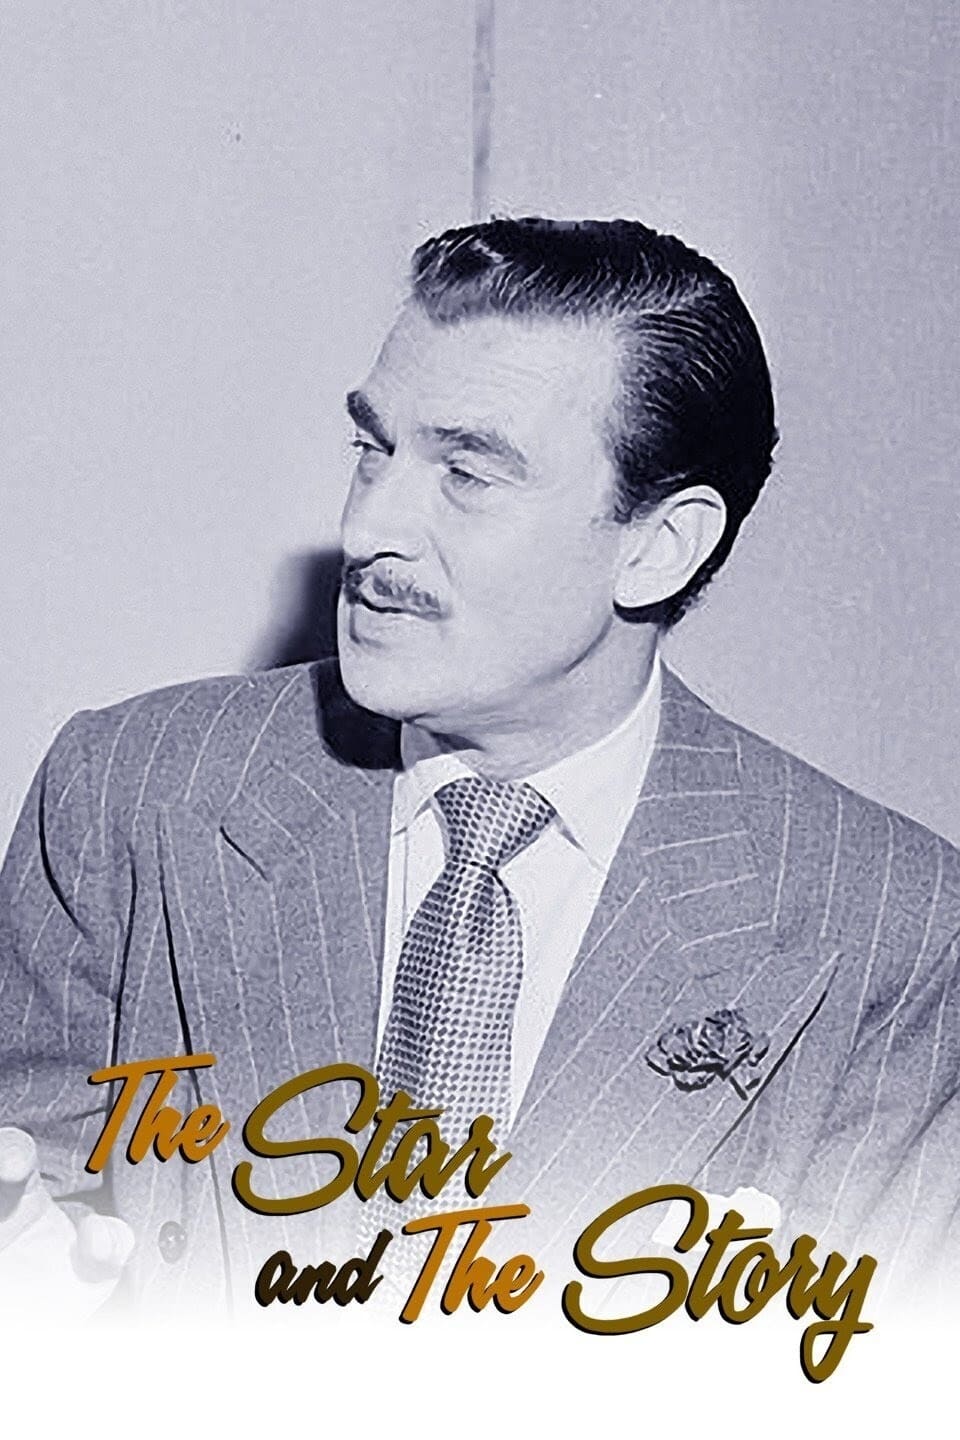 The Star and the Story (1955)